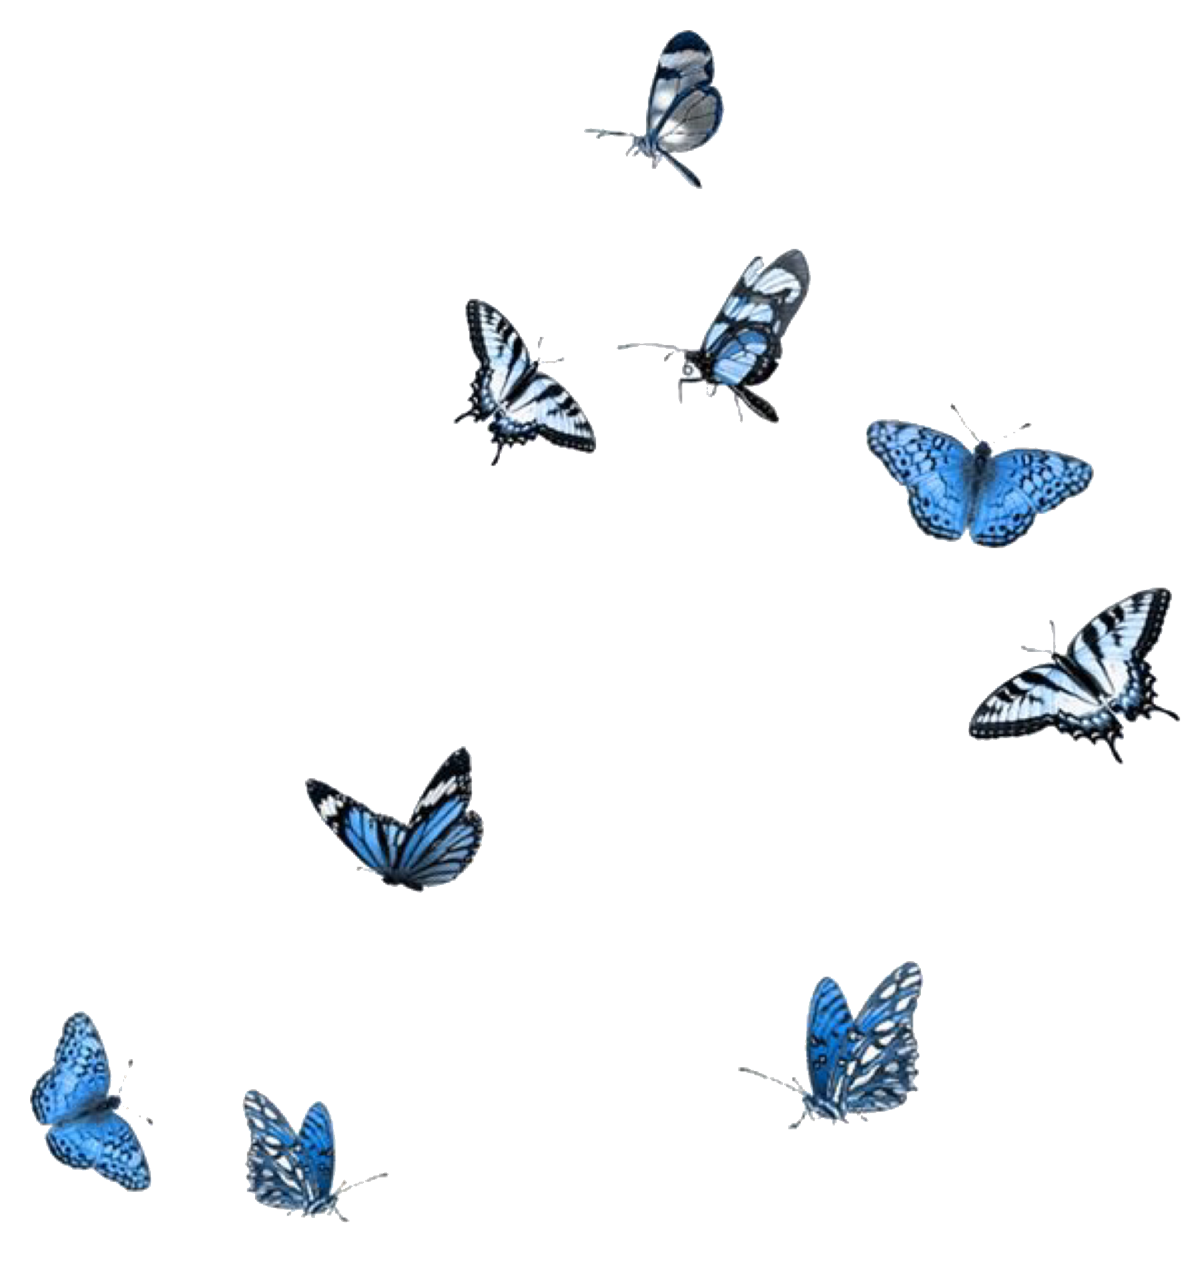 Black Butterfly PNG Download Image